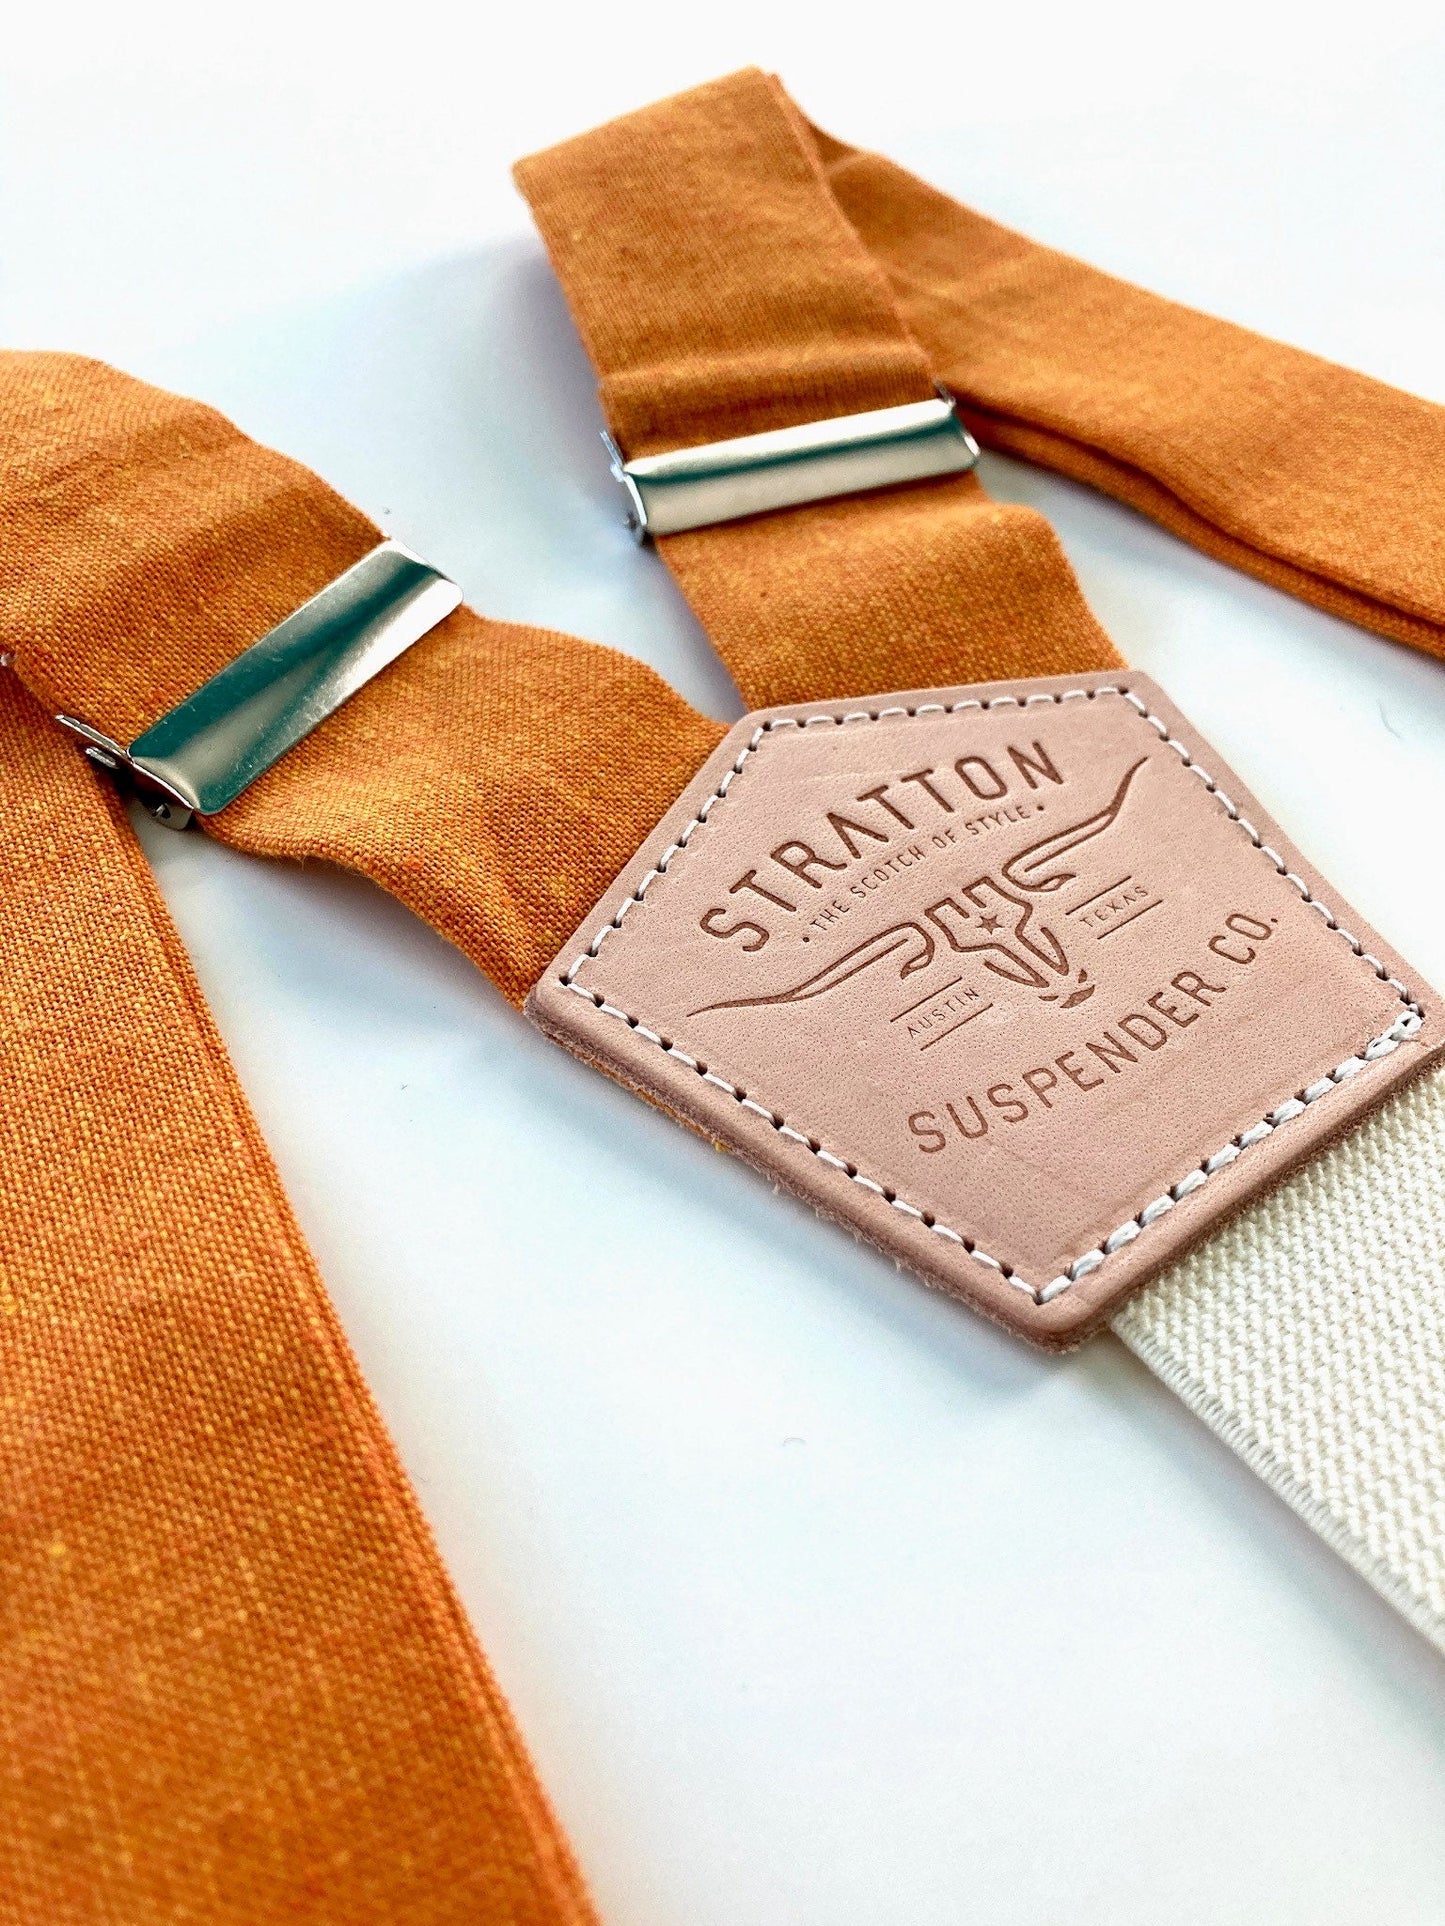 Stratton Suspender Co. features the Burnt Orange linen suspenders on veg tan shoulder leather with cream colored elastic back strap for the Fall 2022 suspenders collection 